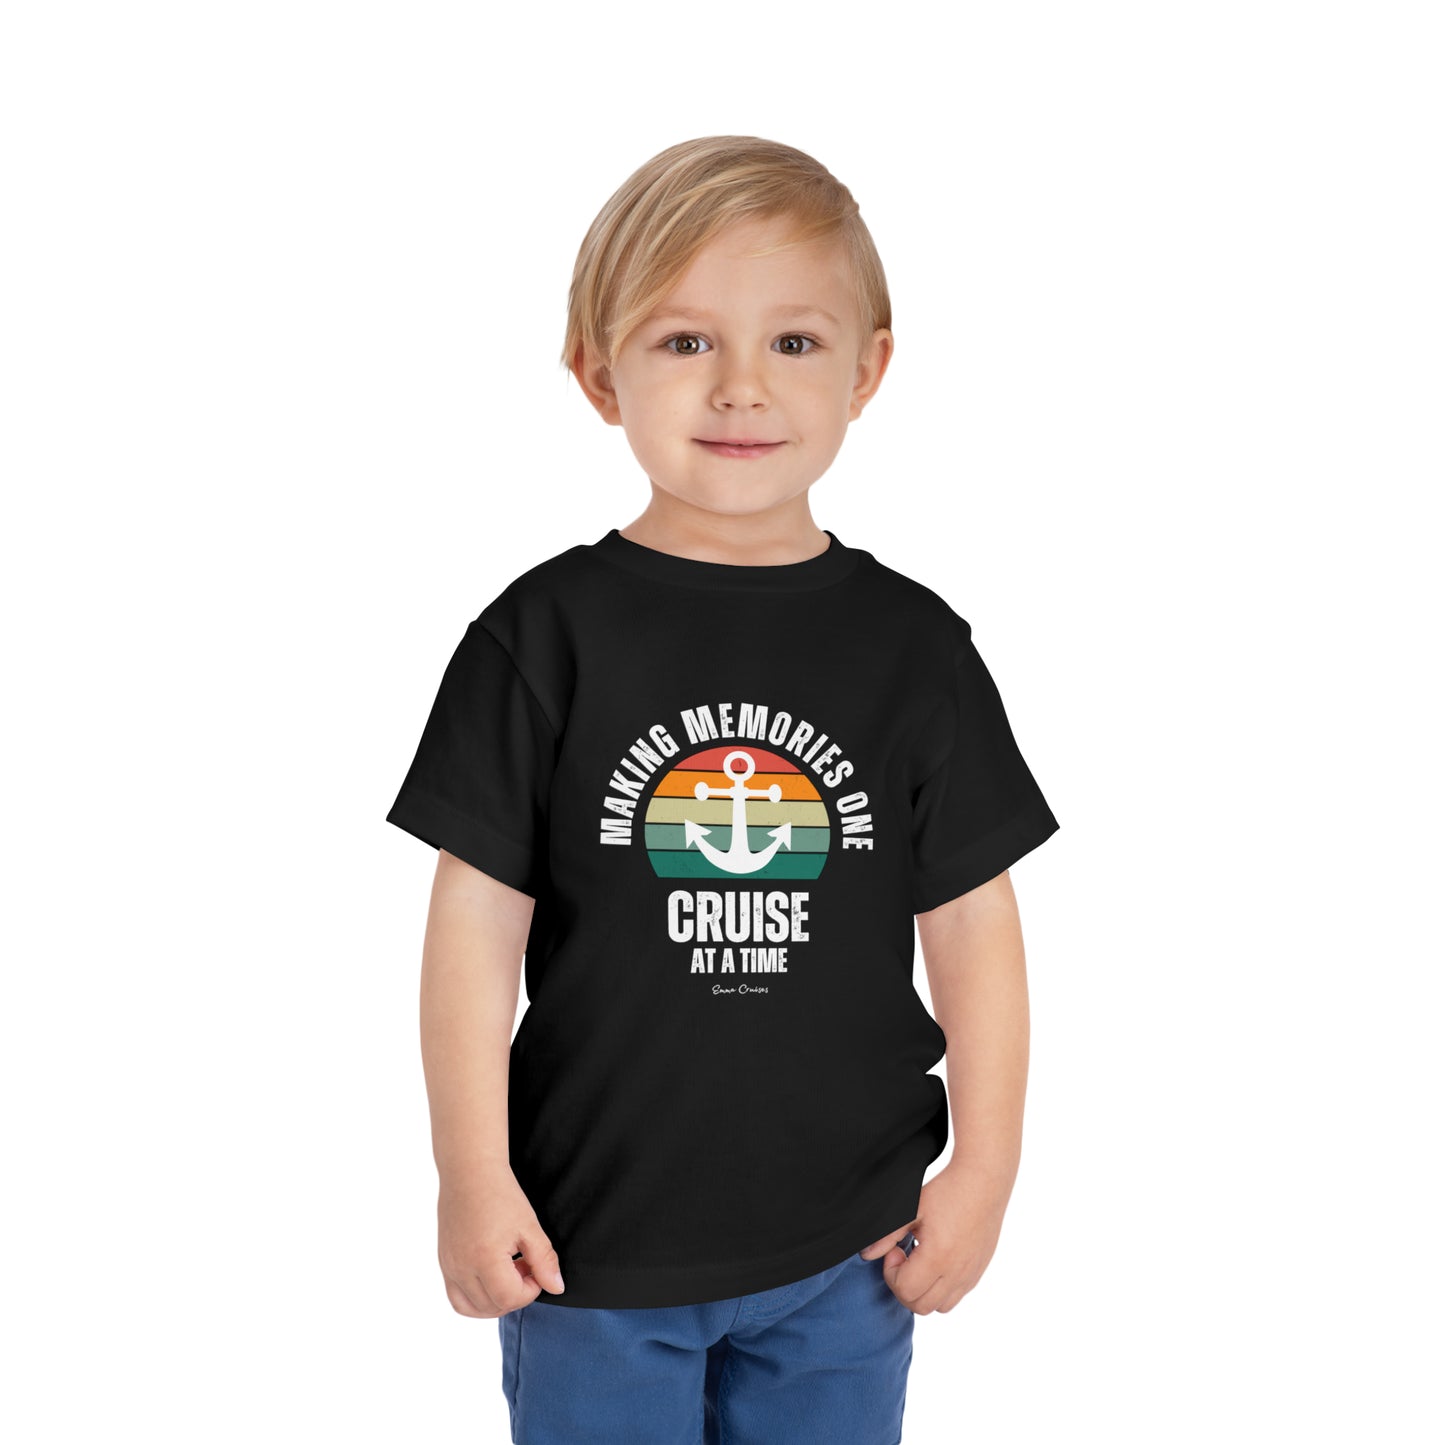 Making Memories One Cruise at a Time - Toddler UNISEX T-Shirt